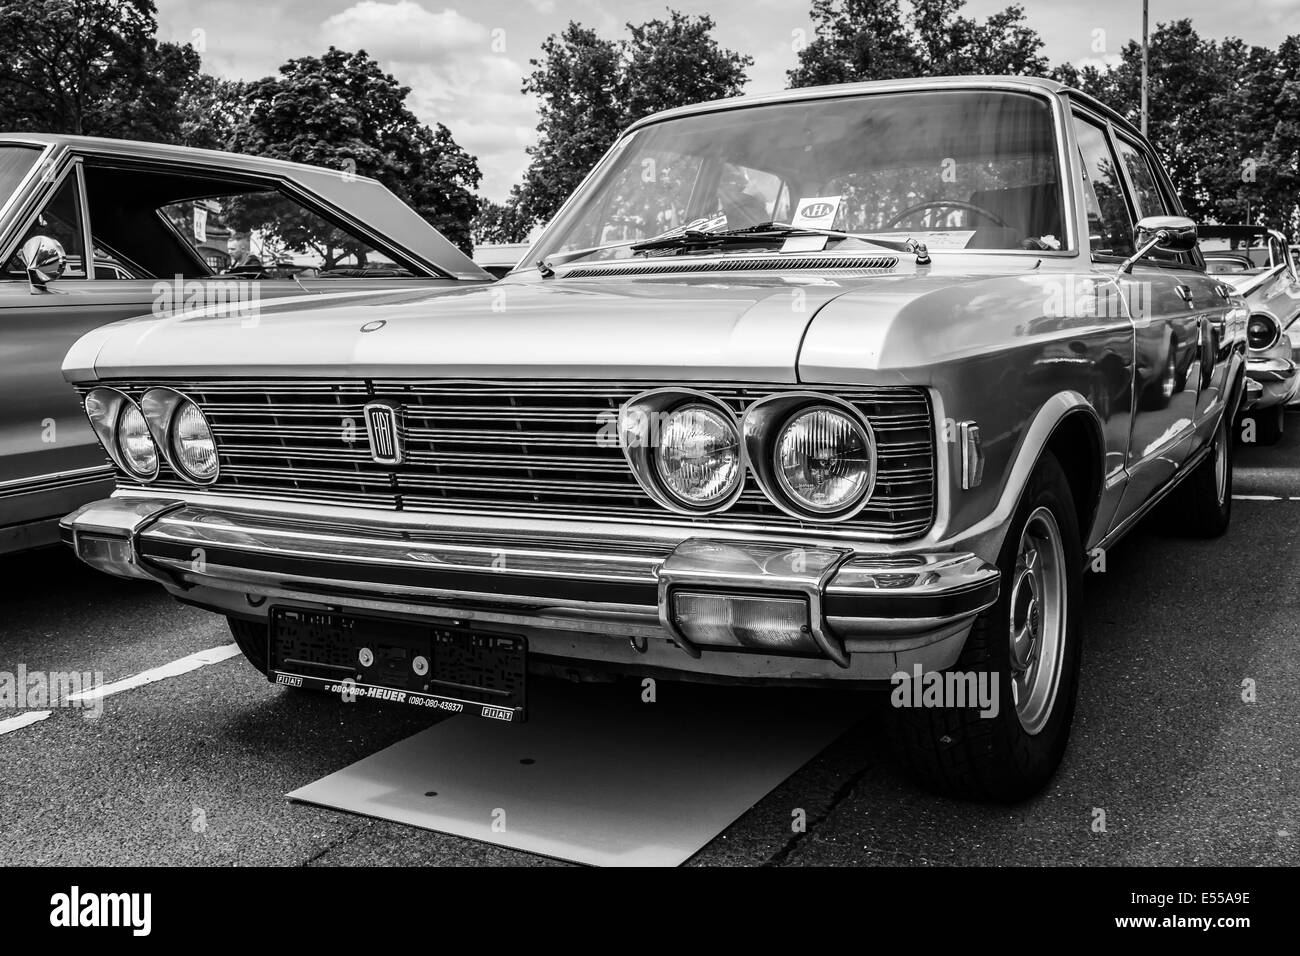 BERLIN, GERMANY - MAY 17, 2014: Large executive car Fiat 130. Black and white. 27th Oldtimer Day Berlin - Brandenburg Stock Photo